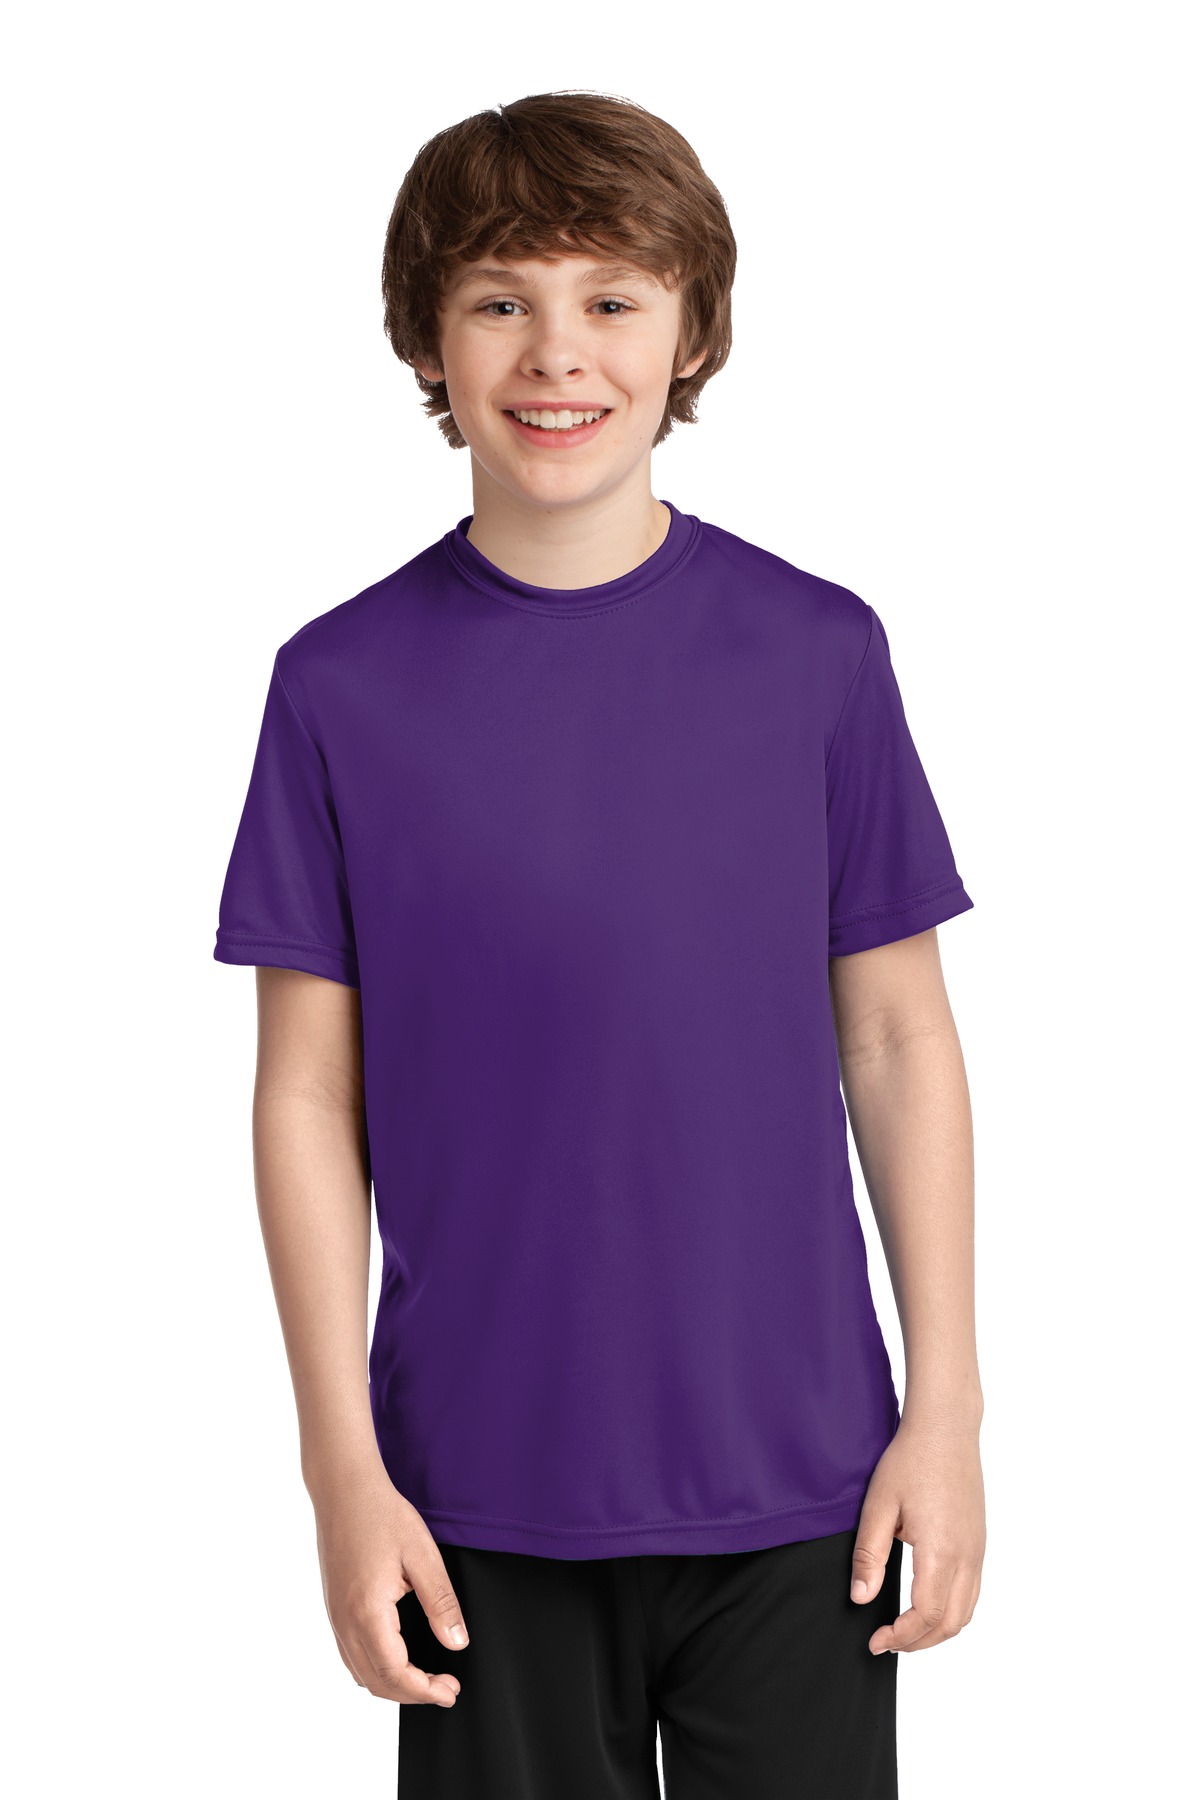 Port & Company Youth Performance Tee PC380Y